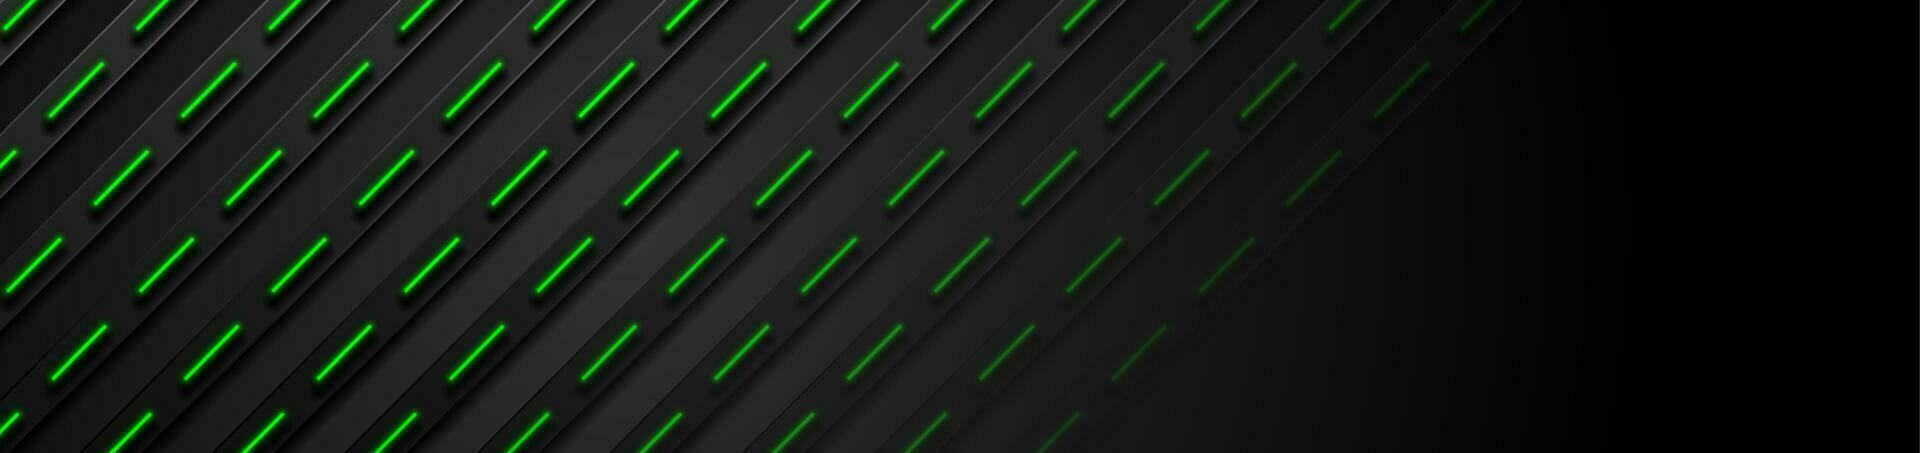 Black and glowing neon green stripes abstract tech background vector